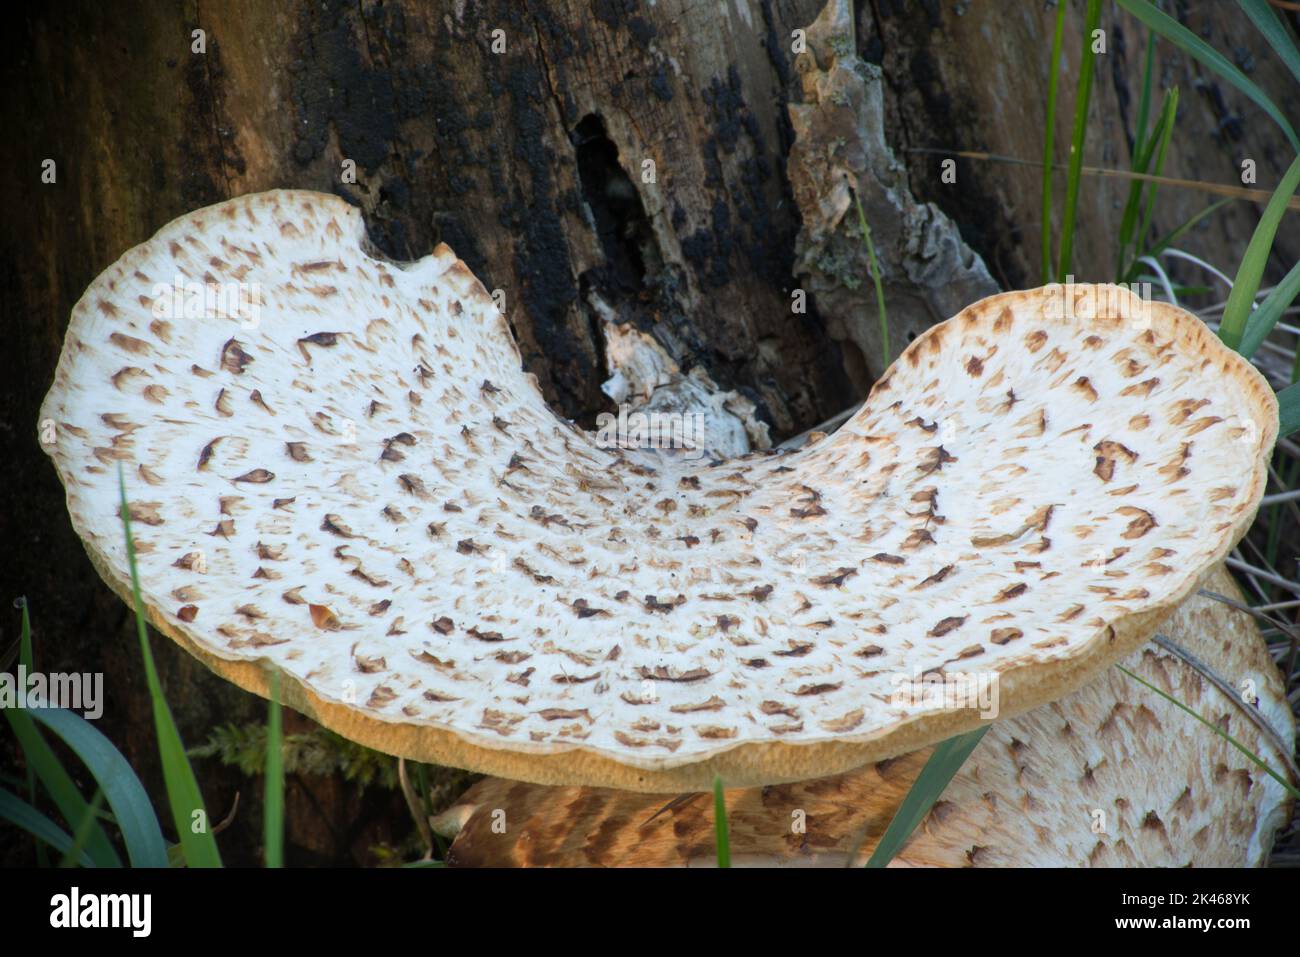 On a walk in the local forest a mushroom seems to be smiling at all those who pass by. Stock Photo